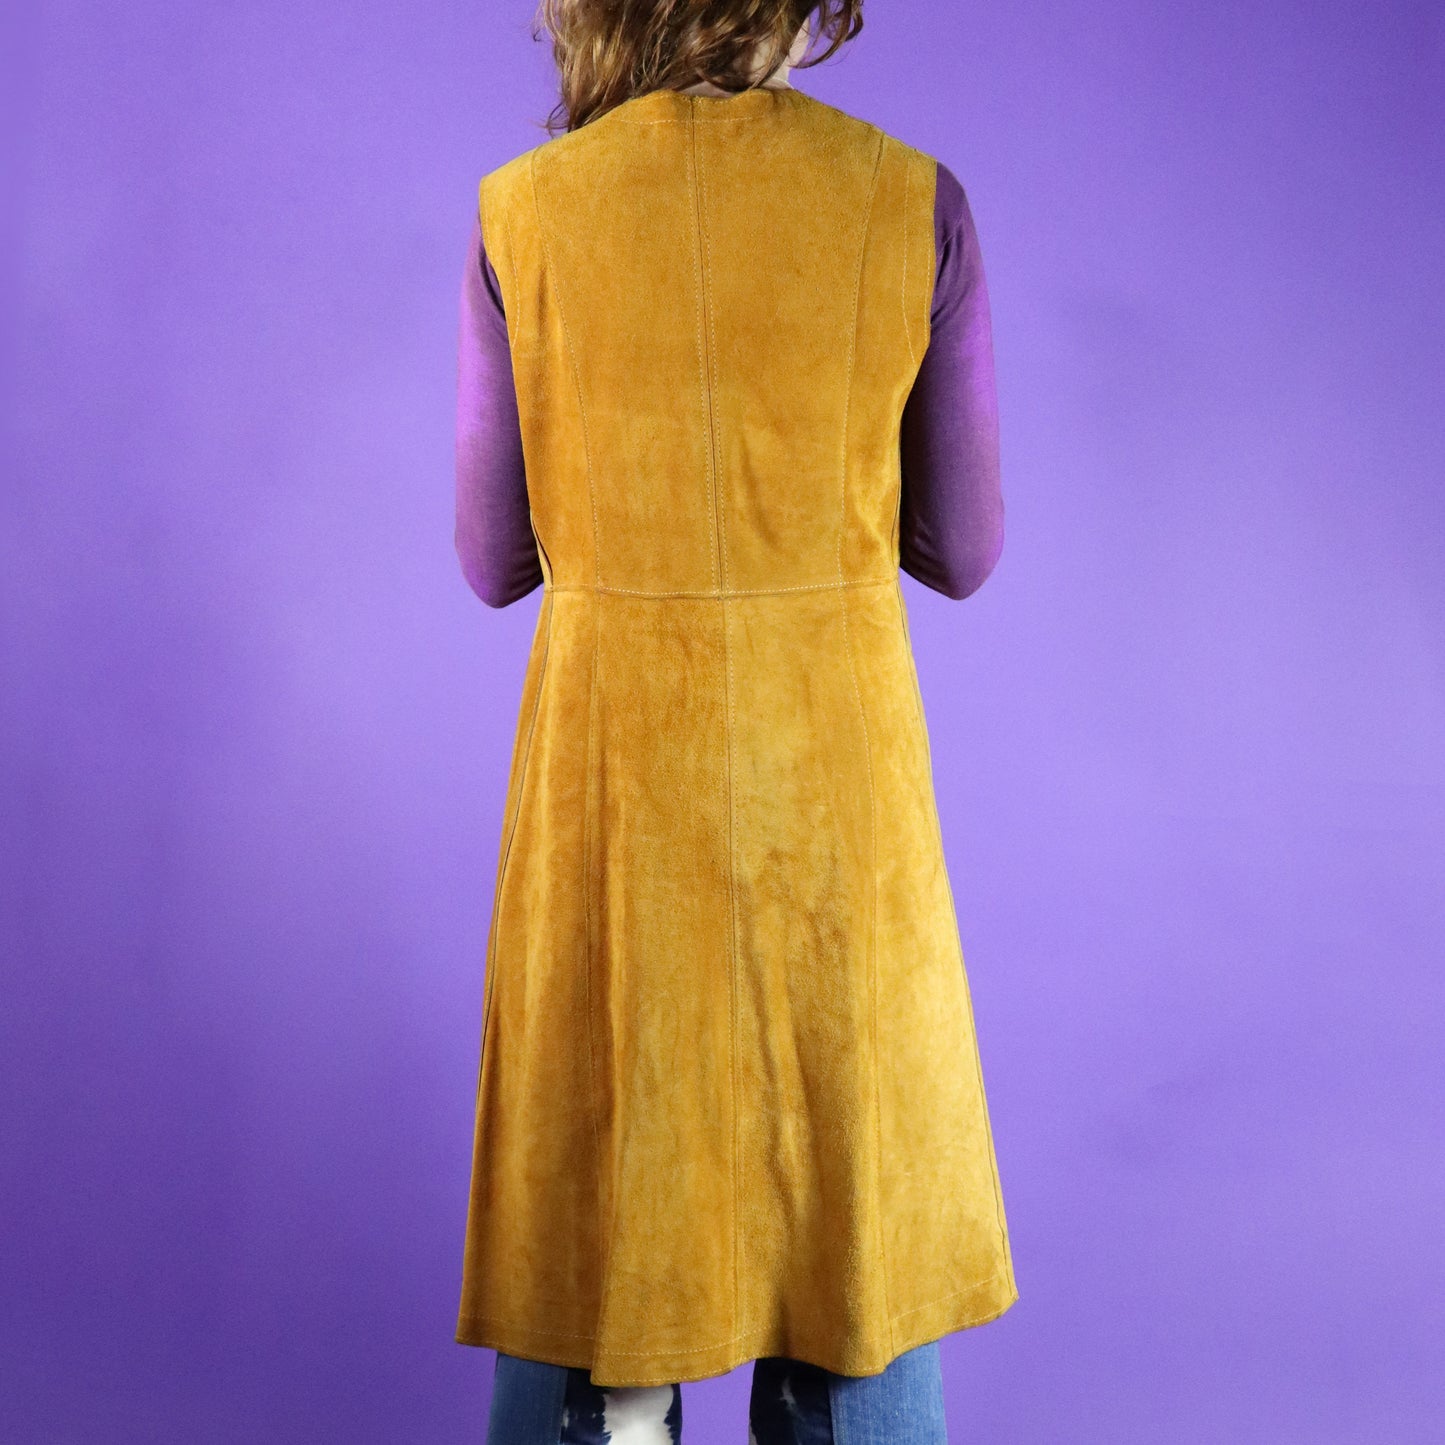 Vintage 1970s Tan Suede Duster Vest with Snake Detail